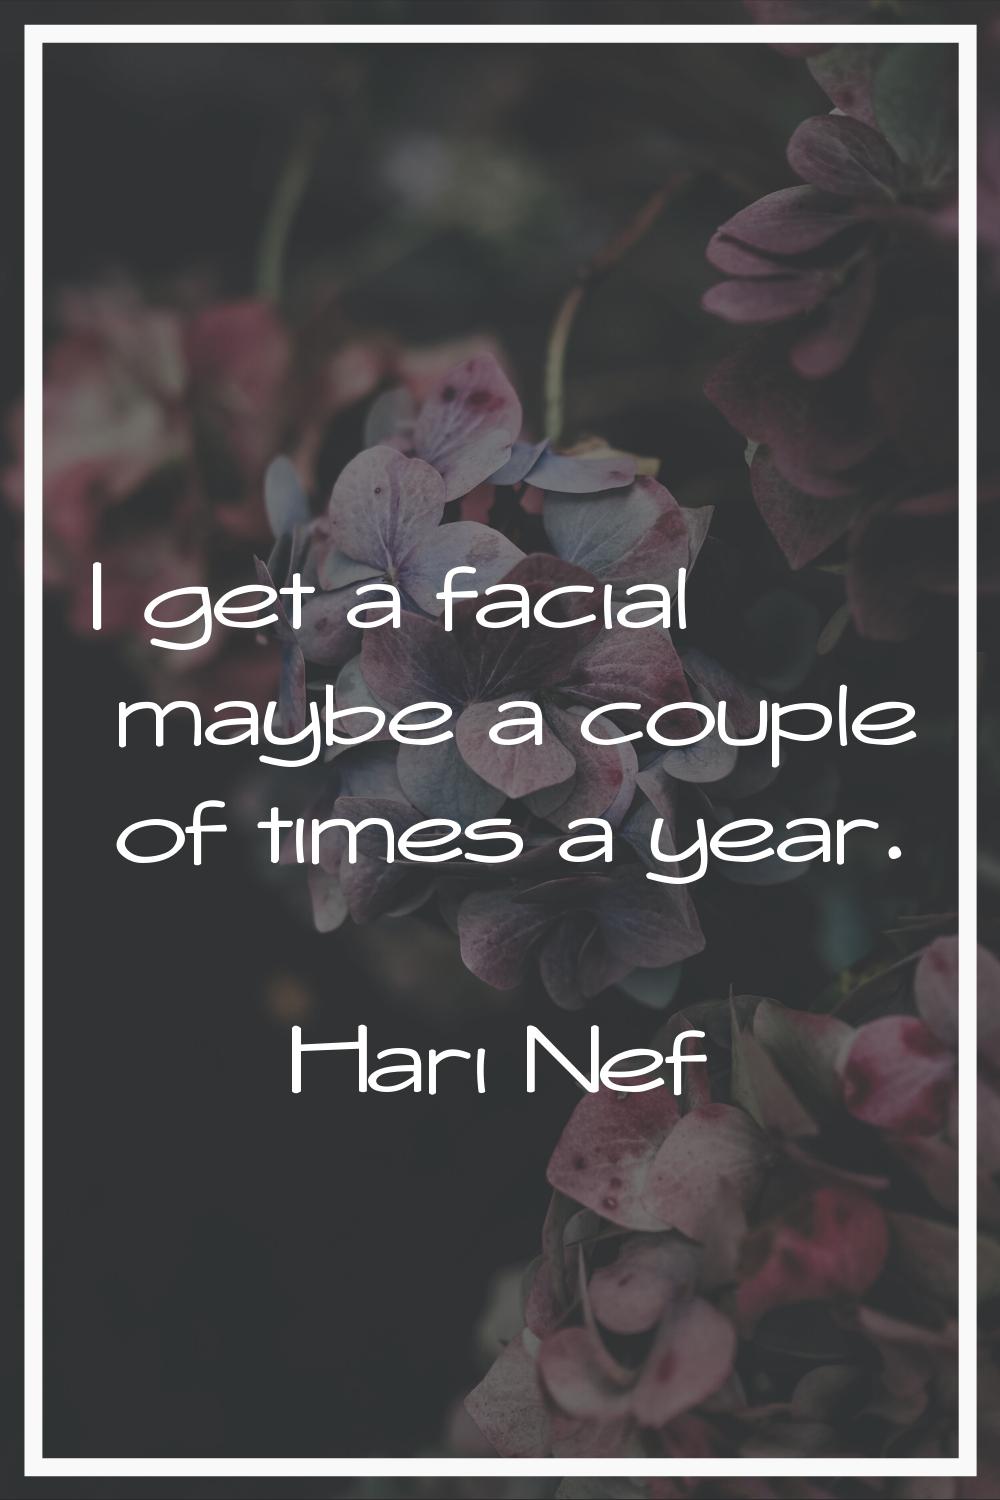 I get a facial maybe a couple of times a year.